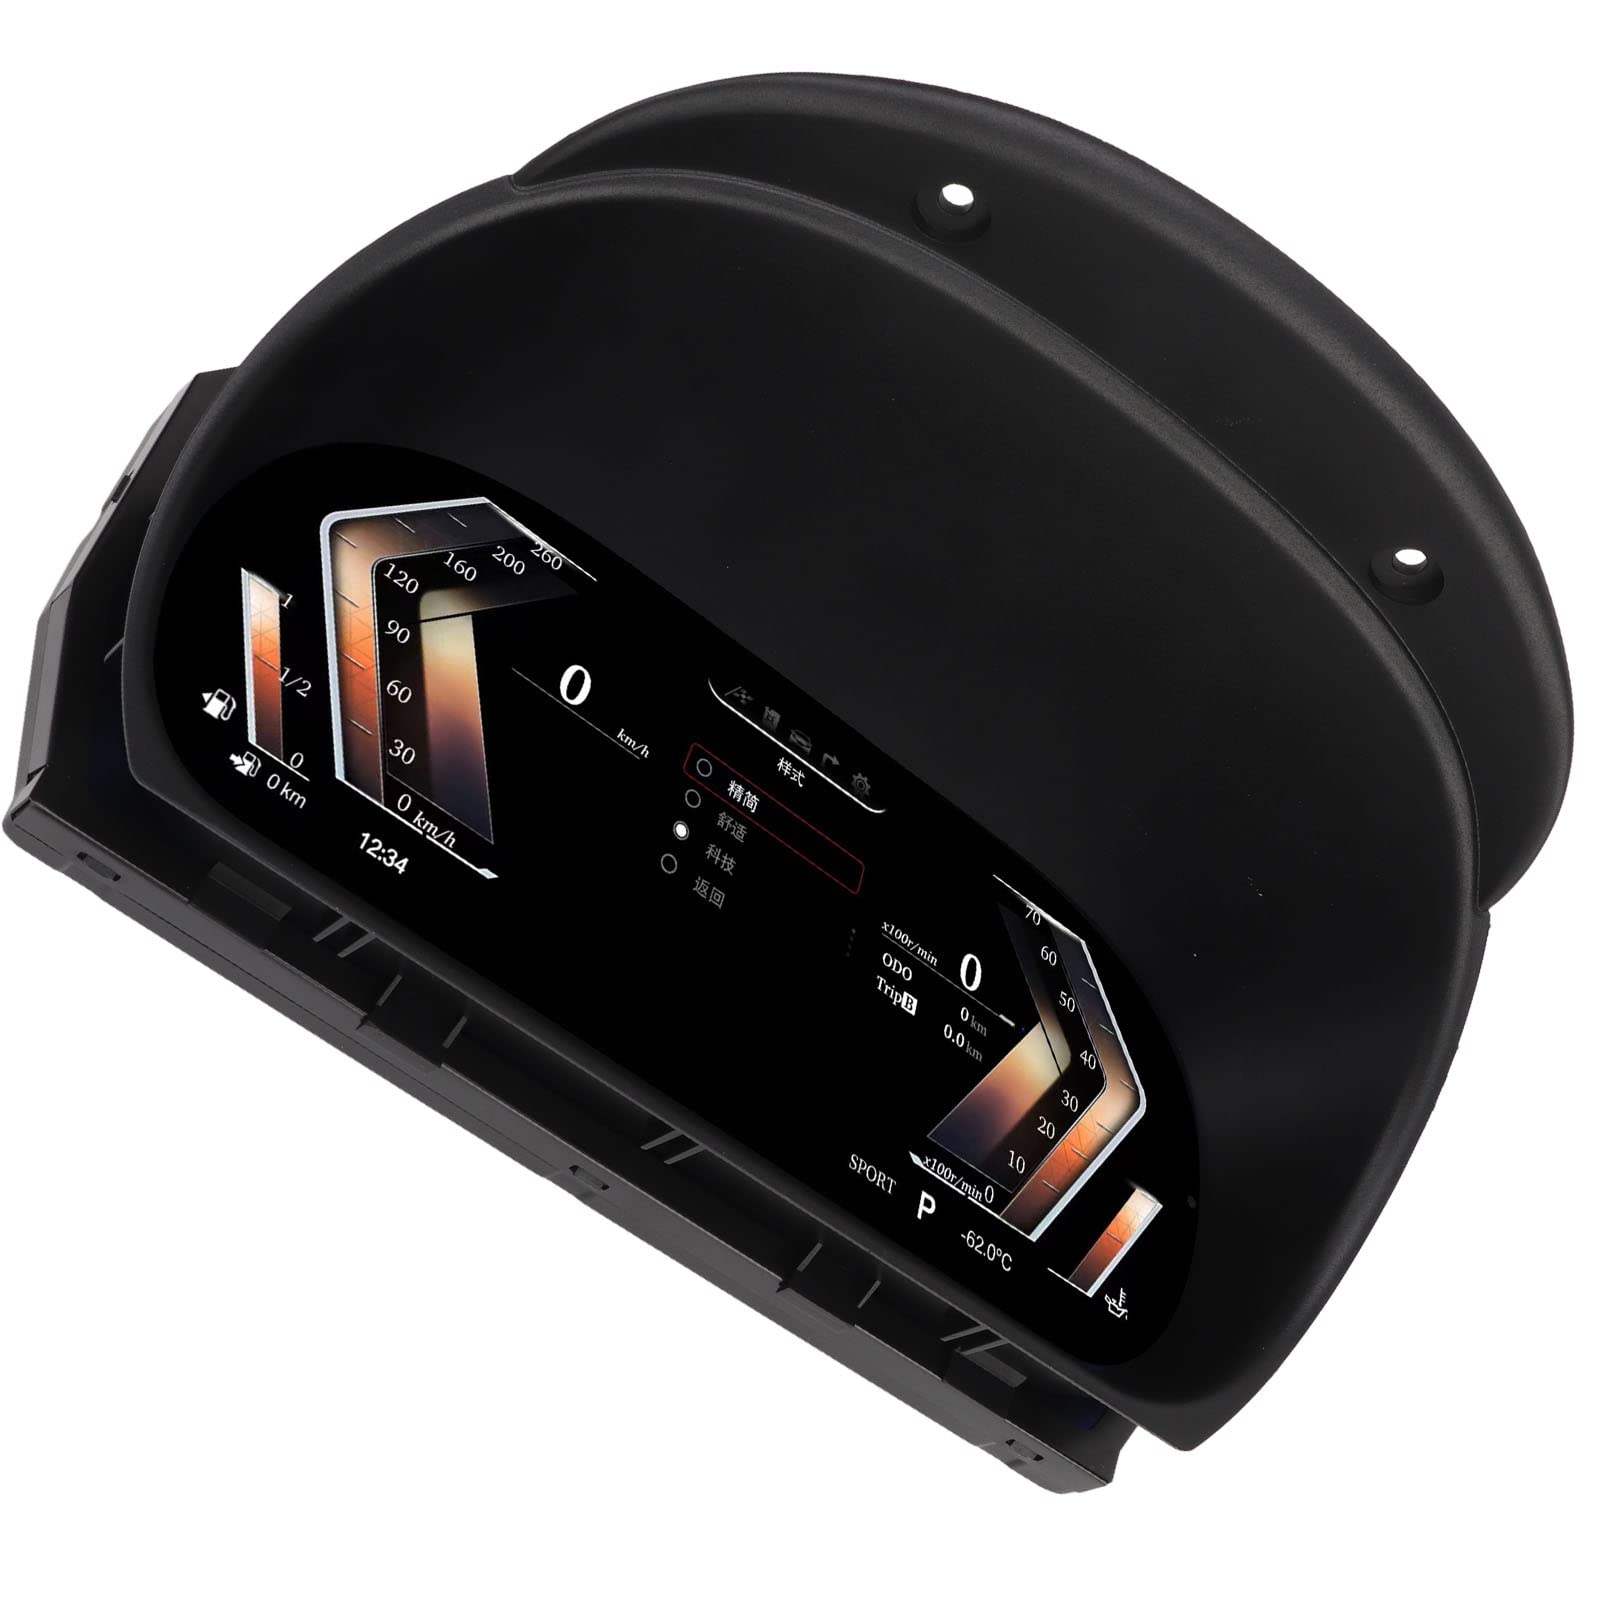 A performance dashboard or speedometer.